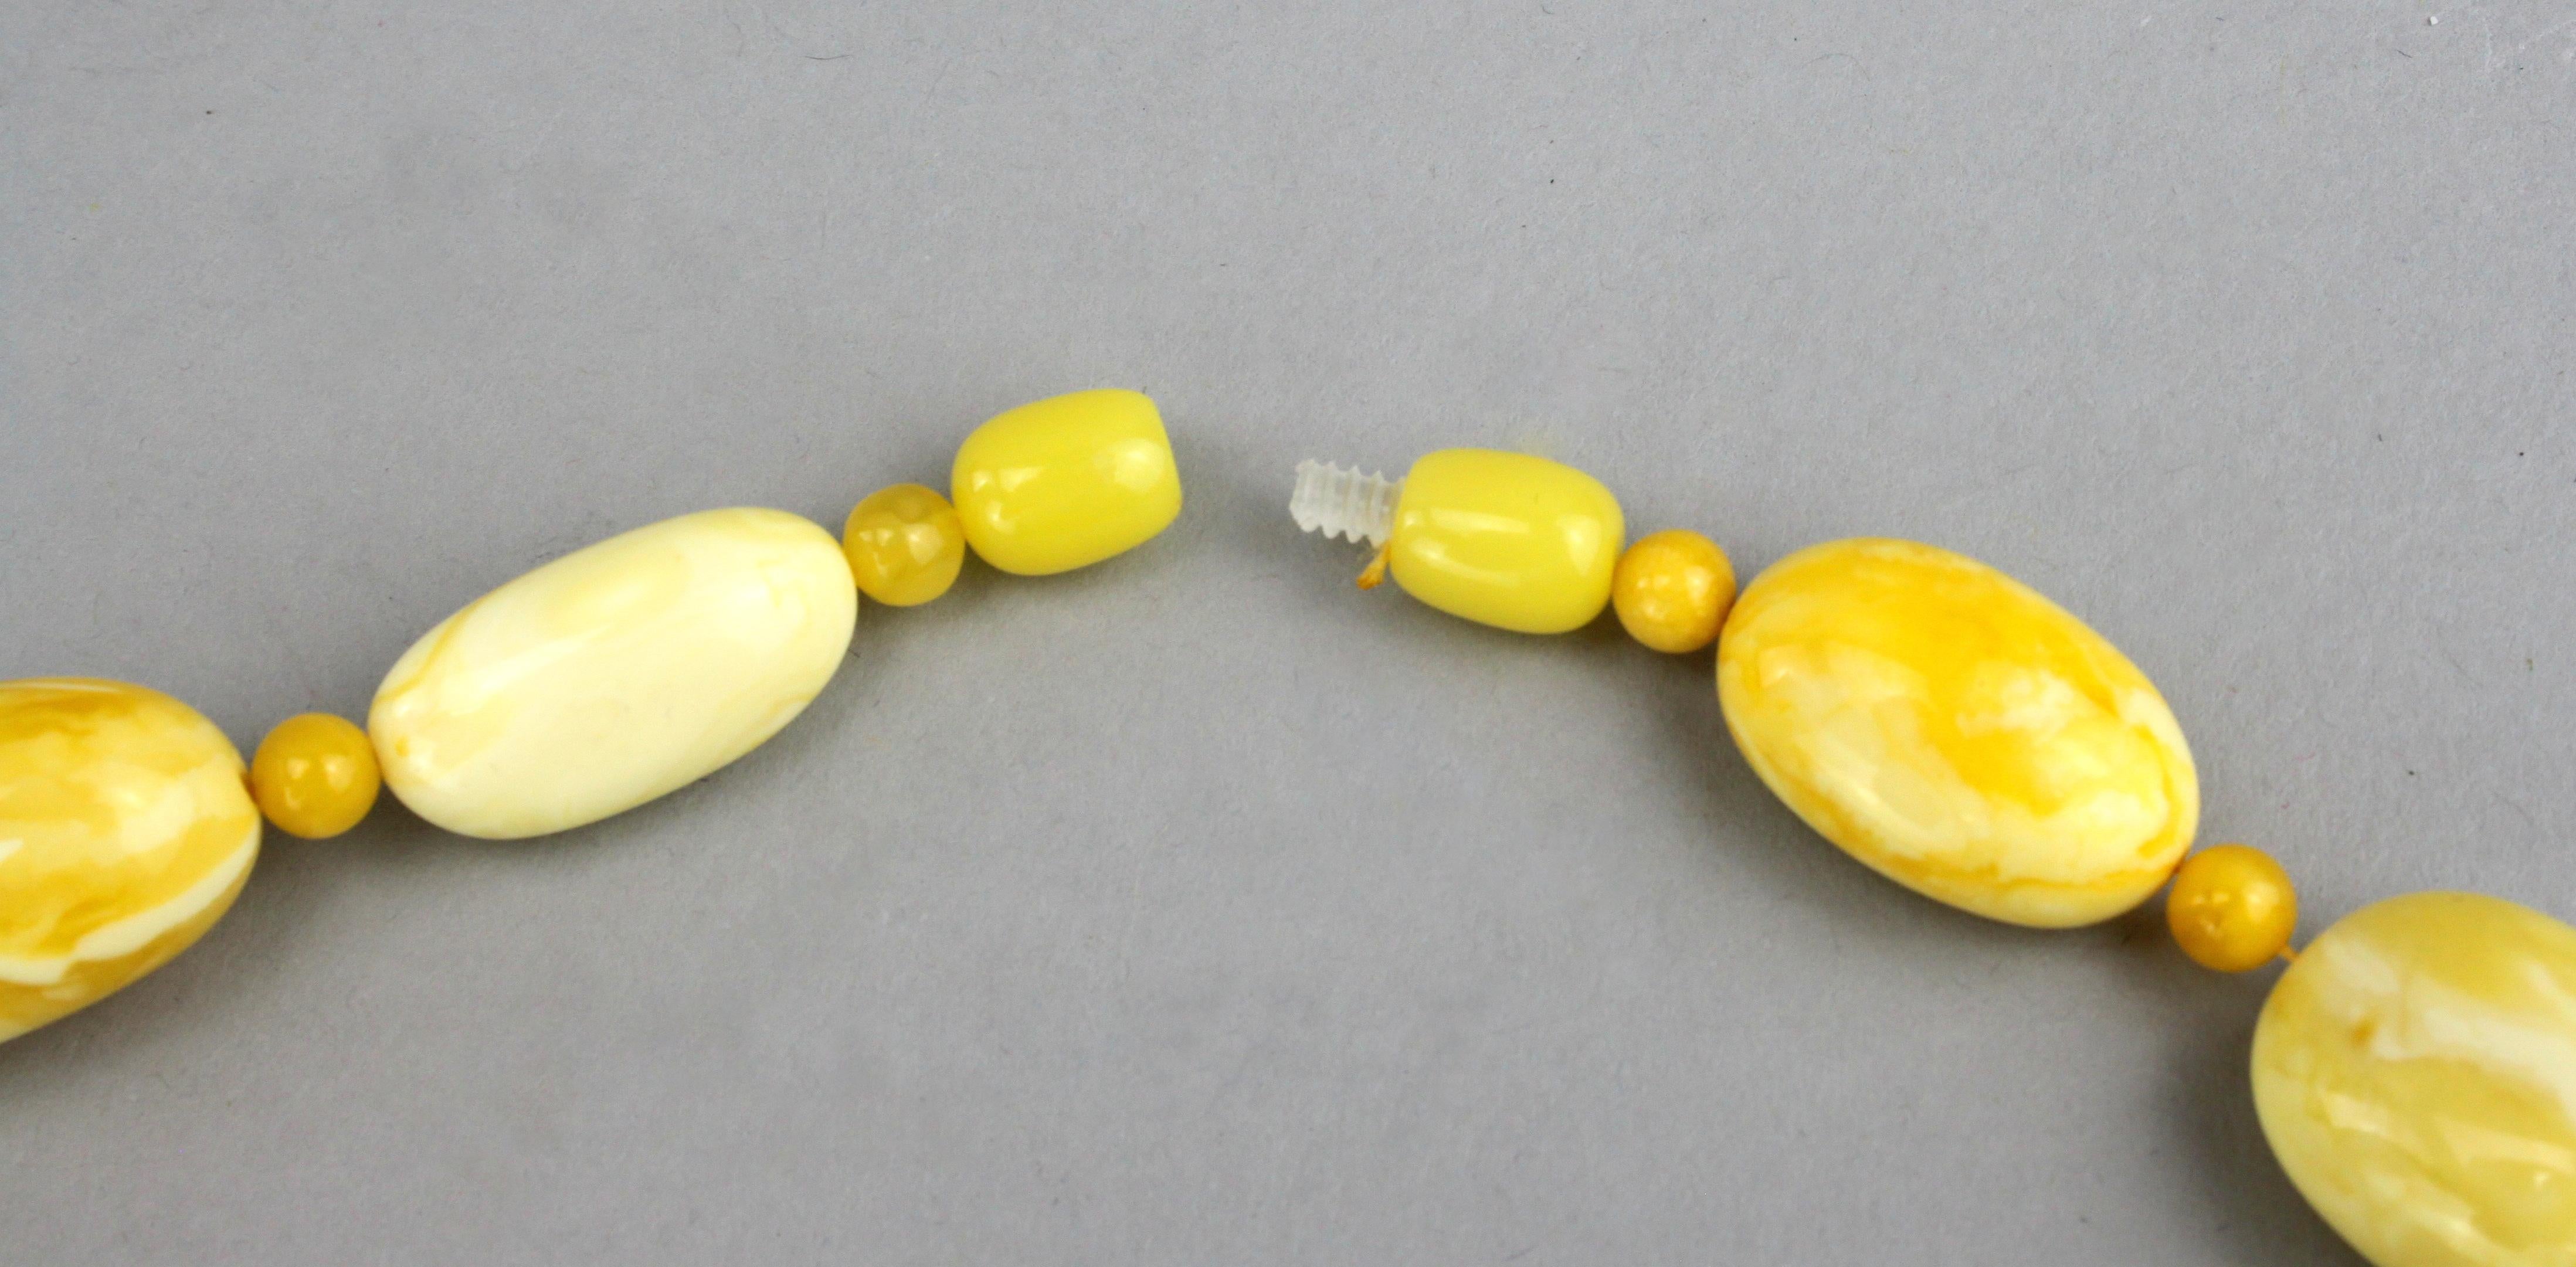 natural baltic amber necklace